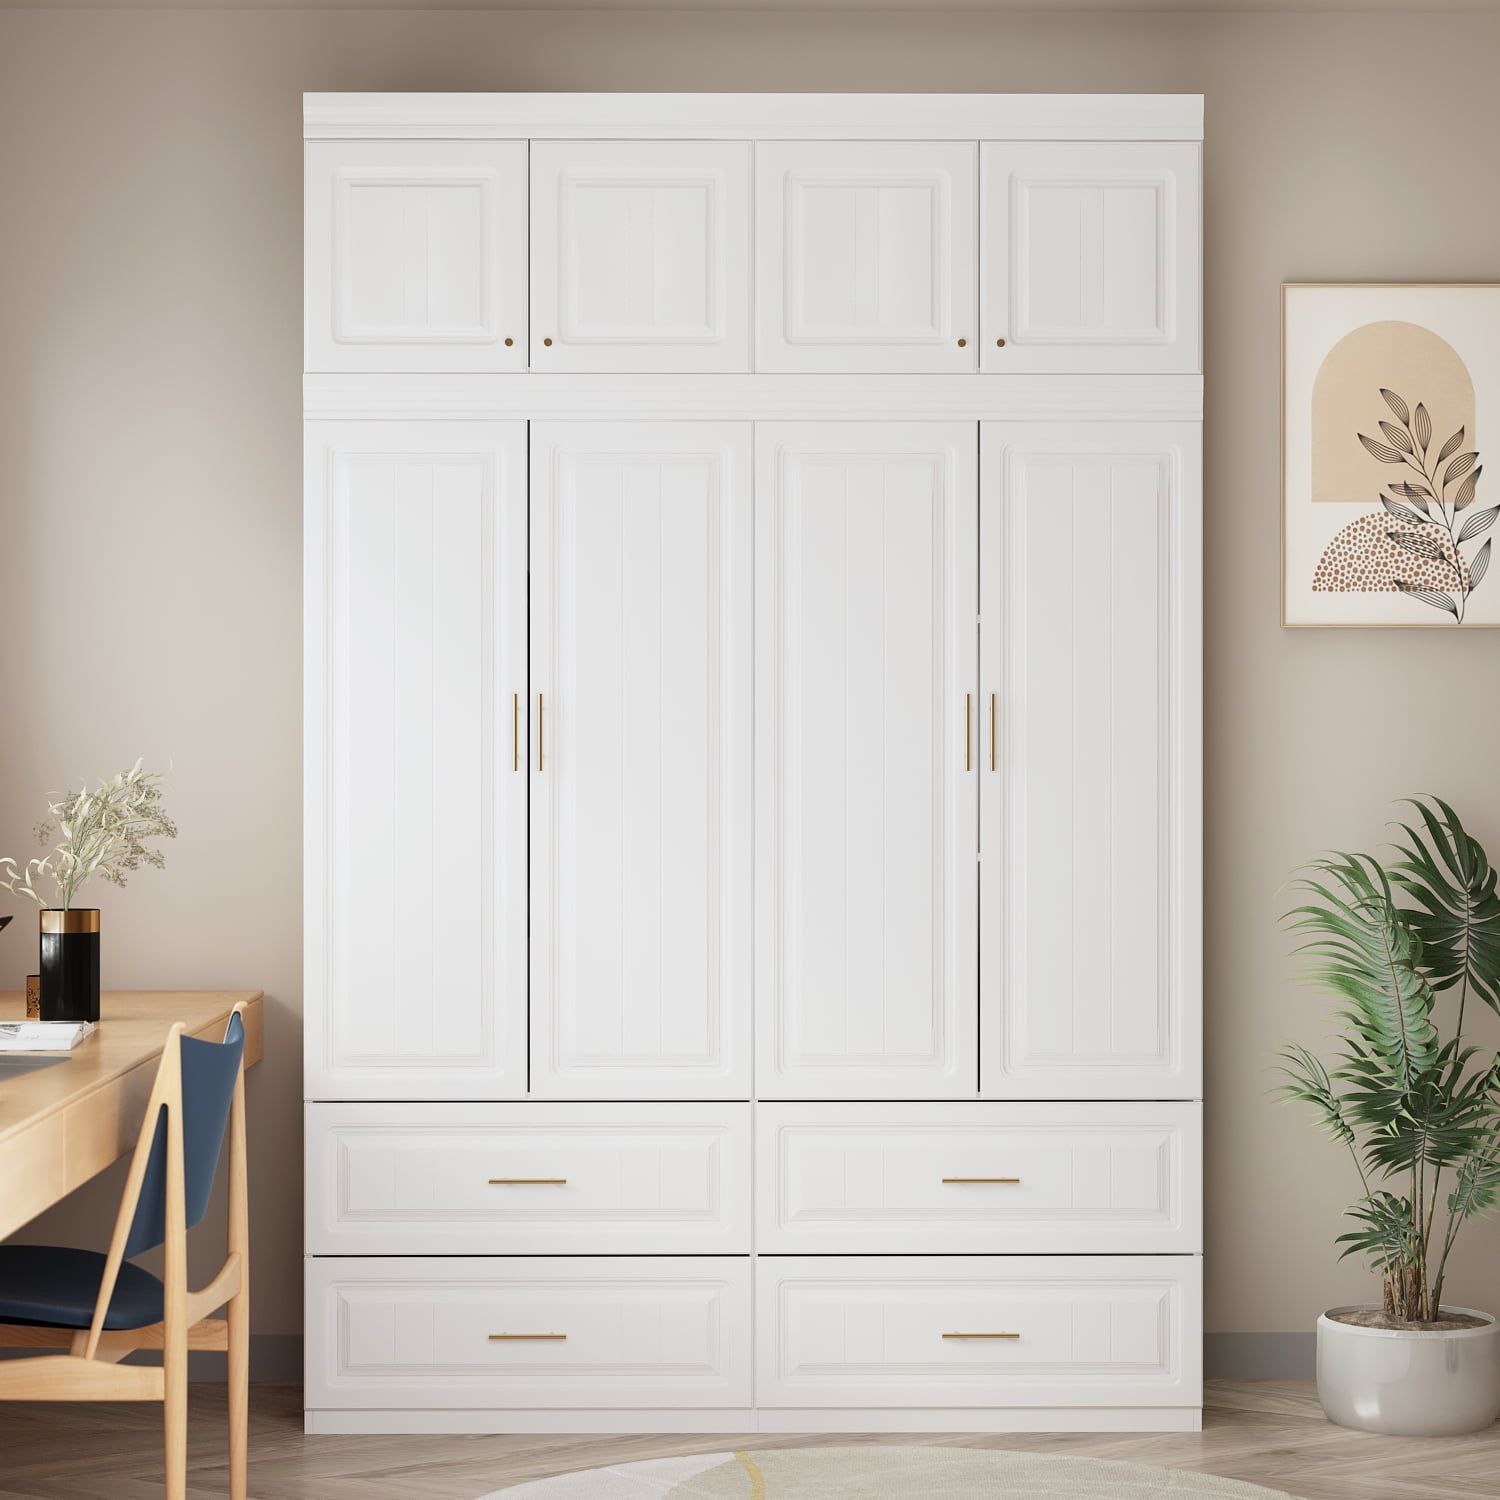 Hitow 4 Door Wardrobe Armoire With Hutch, Shelves And Drawers,white Closet  Storage Cabinet With Clothing Rod For Bedroom,  (View 7 of 15)